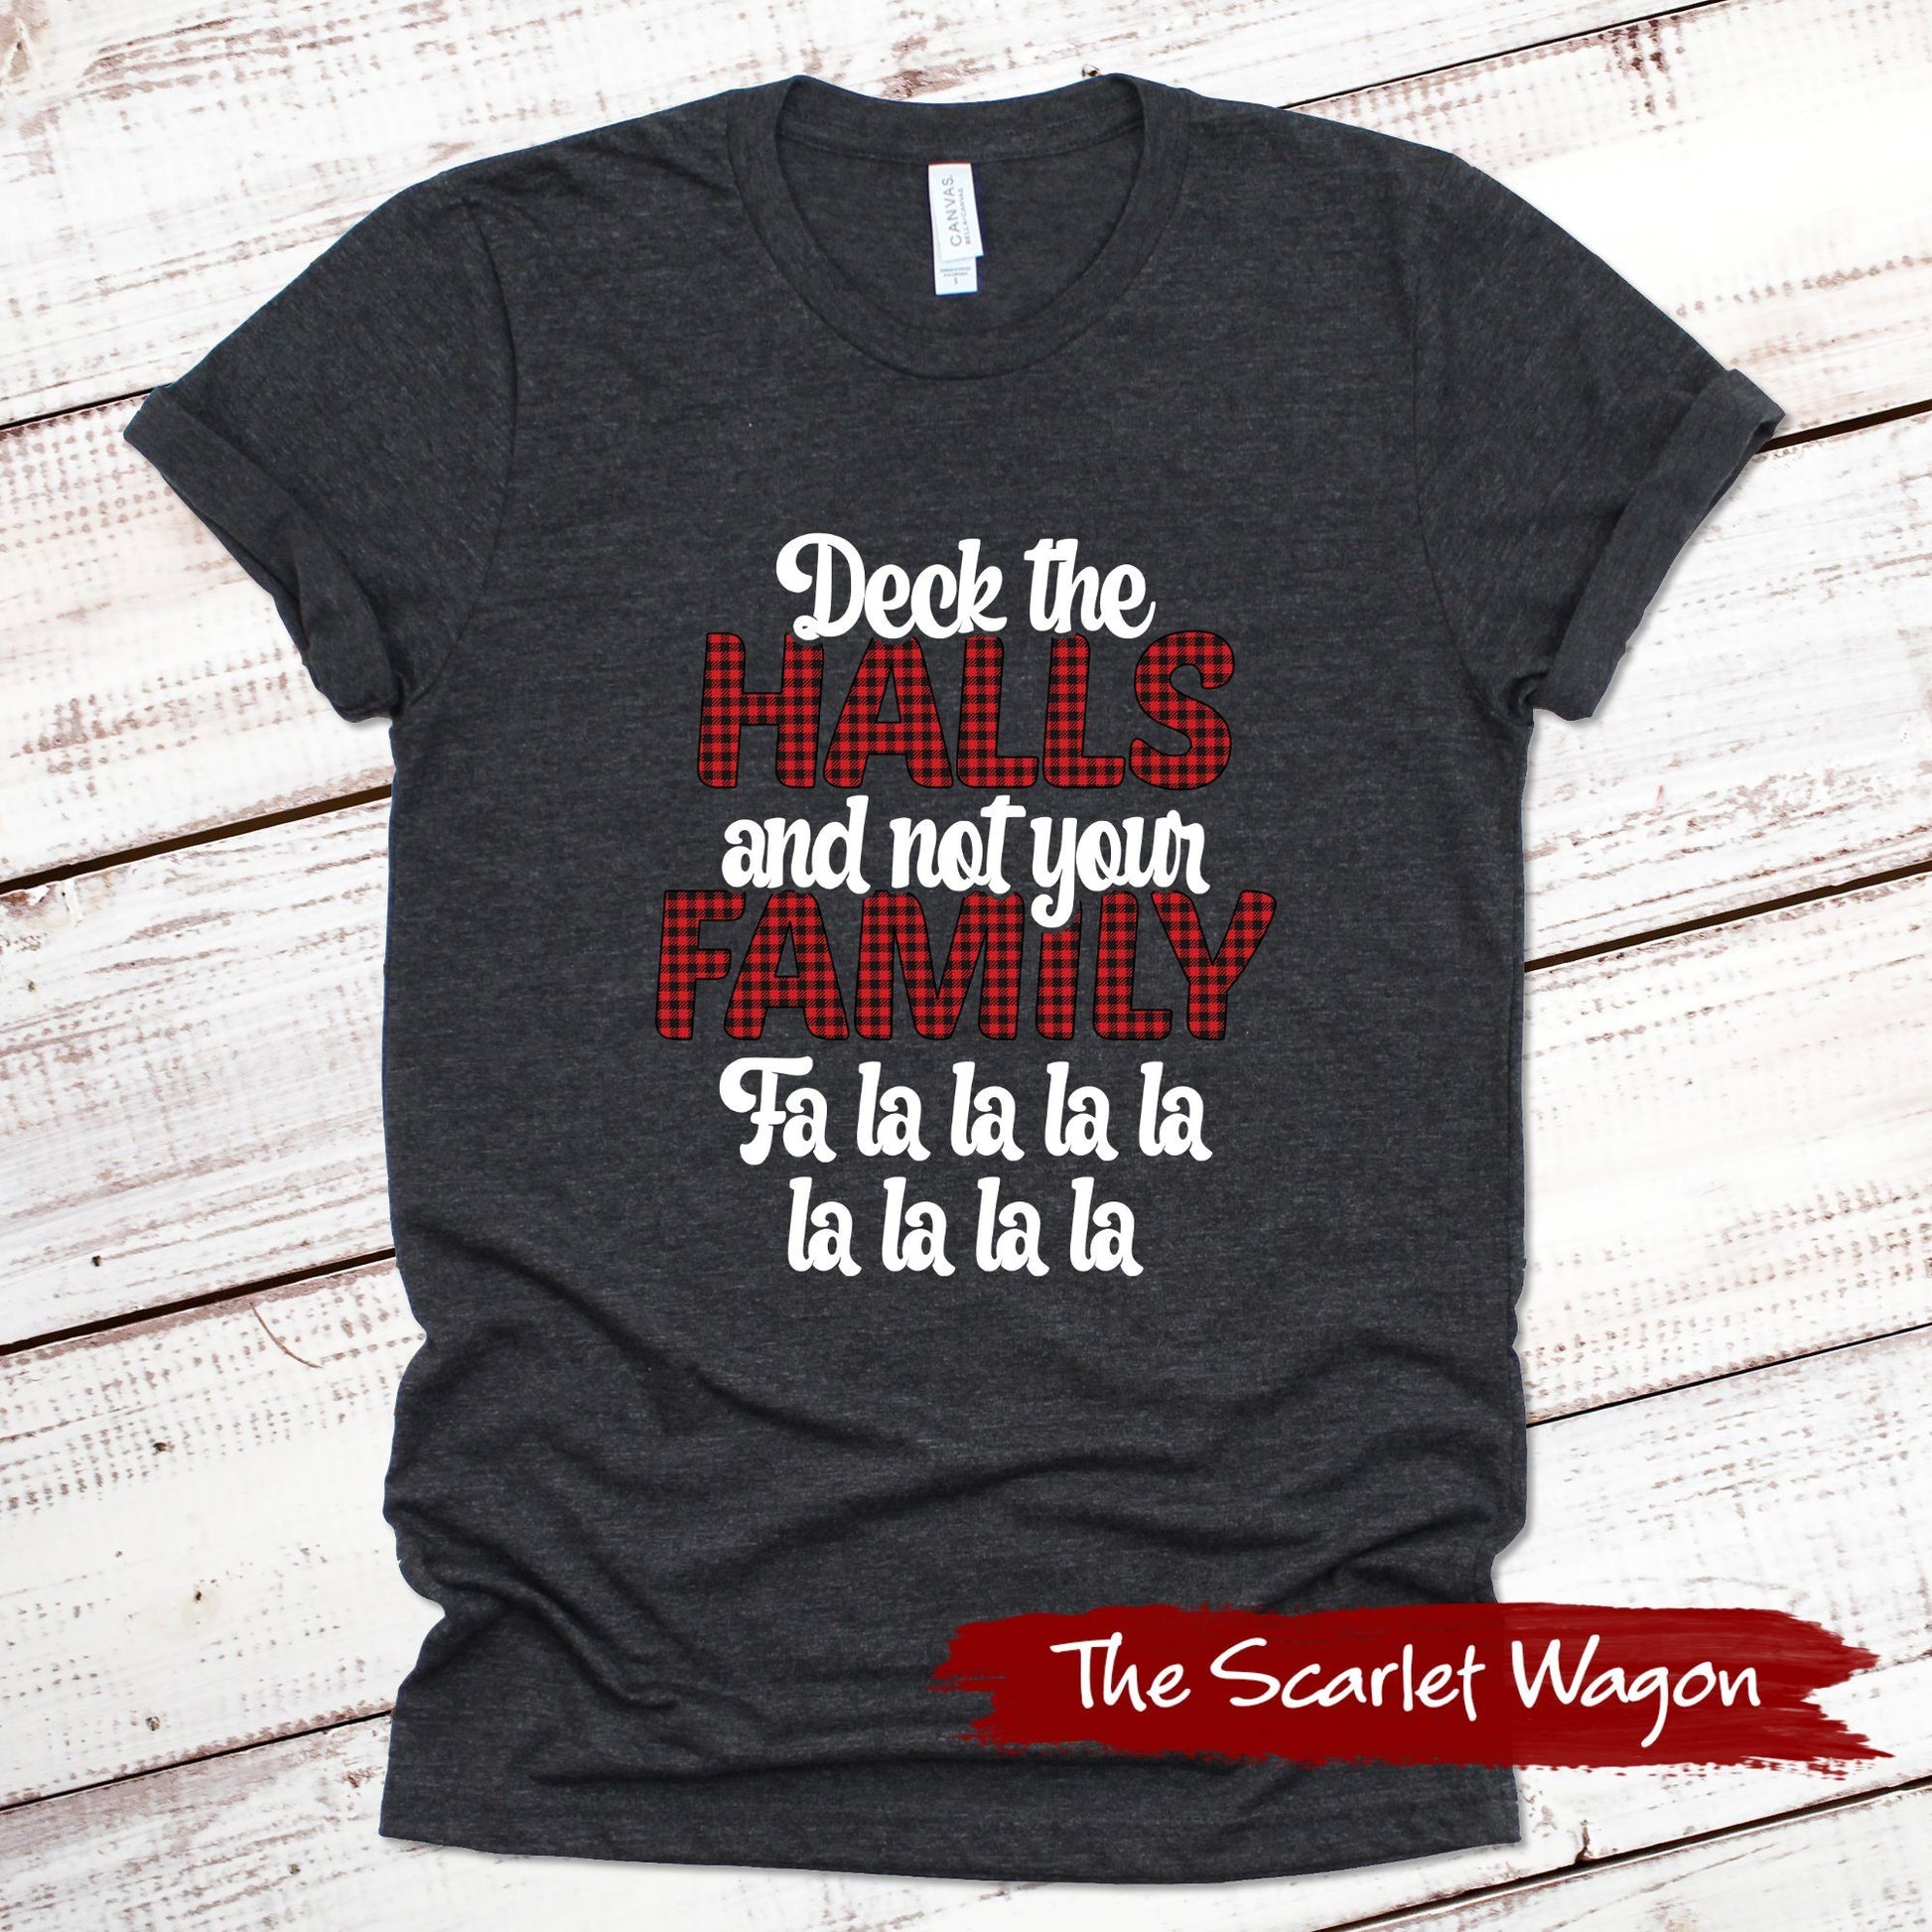 Deck the Halls and Not Your Family Christmas Shirt Scarlet Wagon Dark Gray Heather XS 